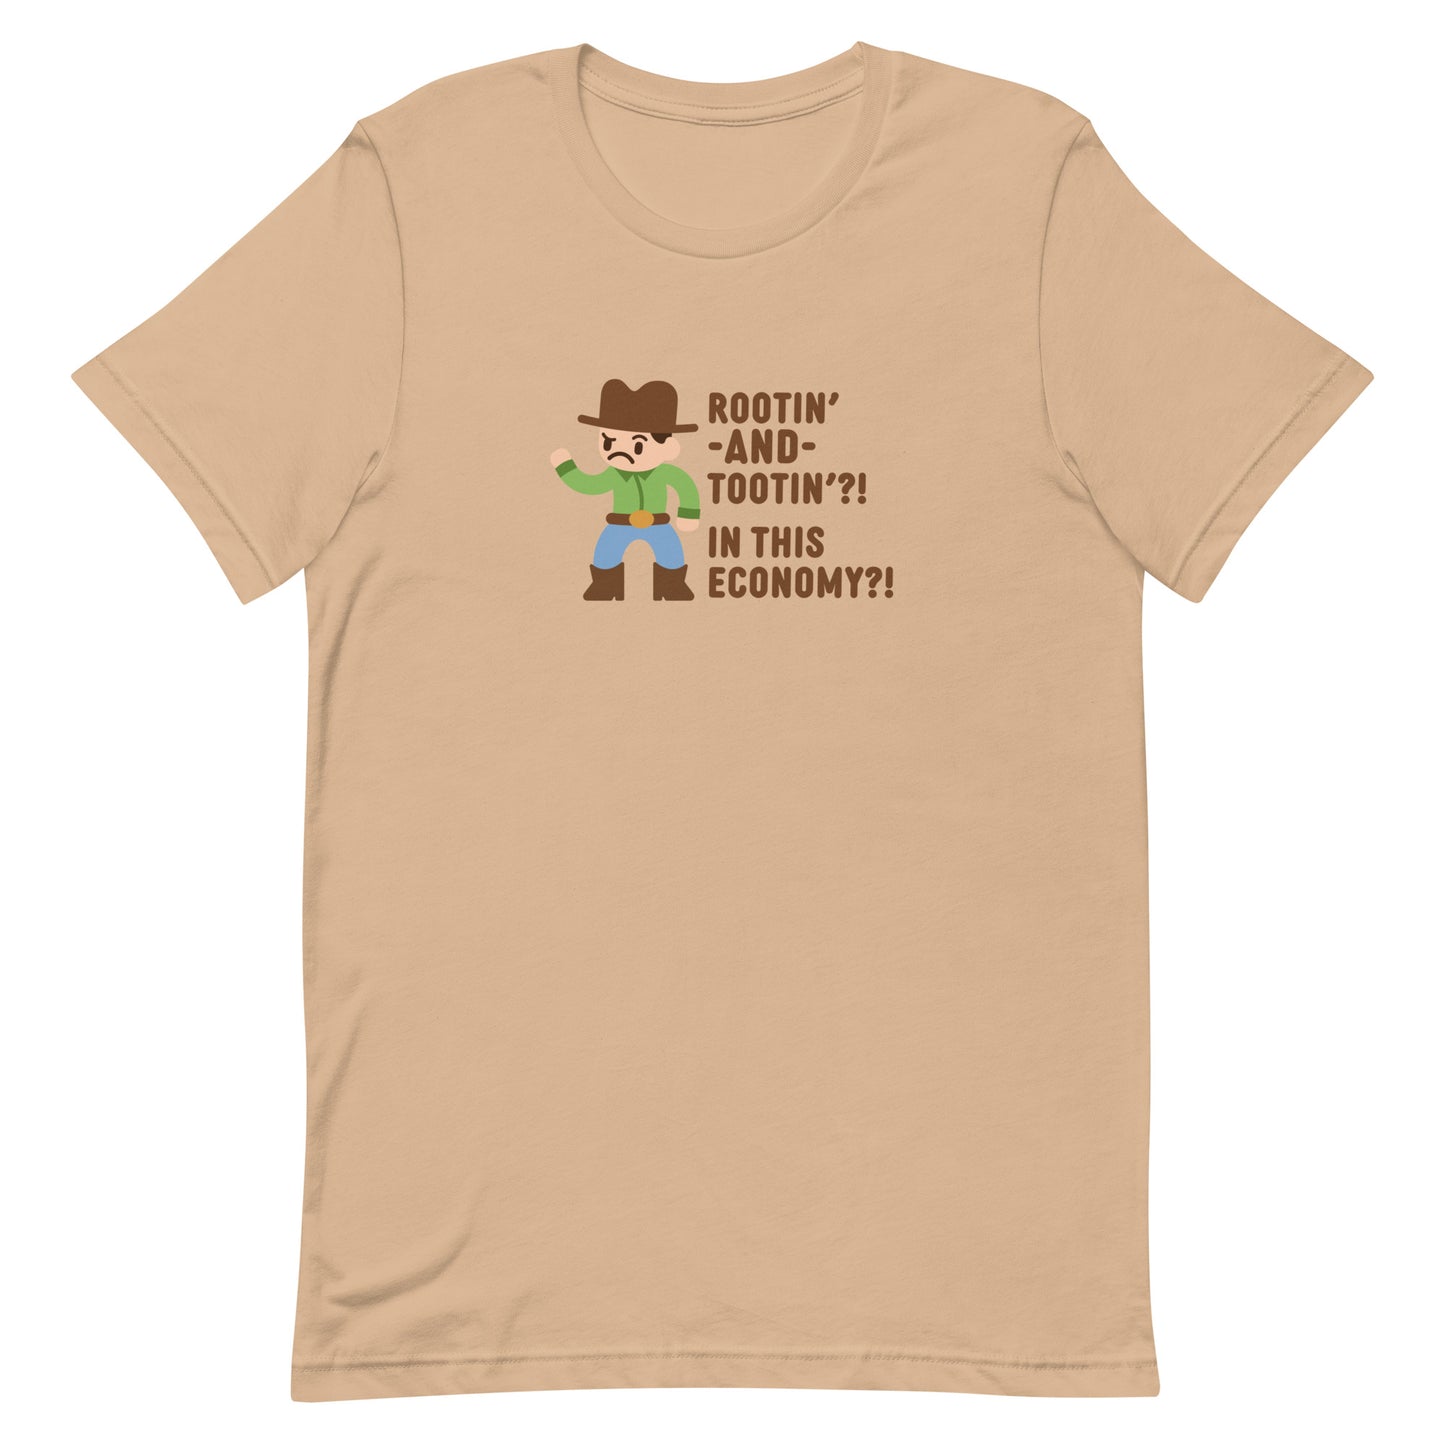 A tan crewneck t-shirt featuring an illustration of a confused-looking cowboy wearing a green shirt. Text to the right of the cowboy reads "Rootin' AND tootin'?! In this economy?!"